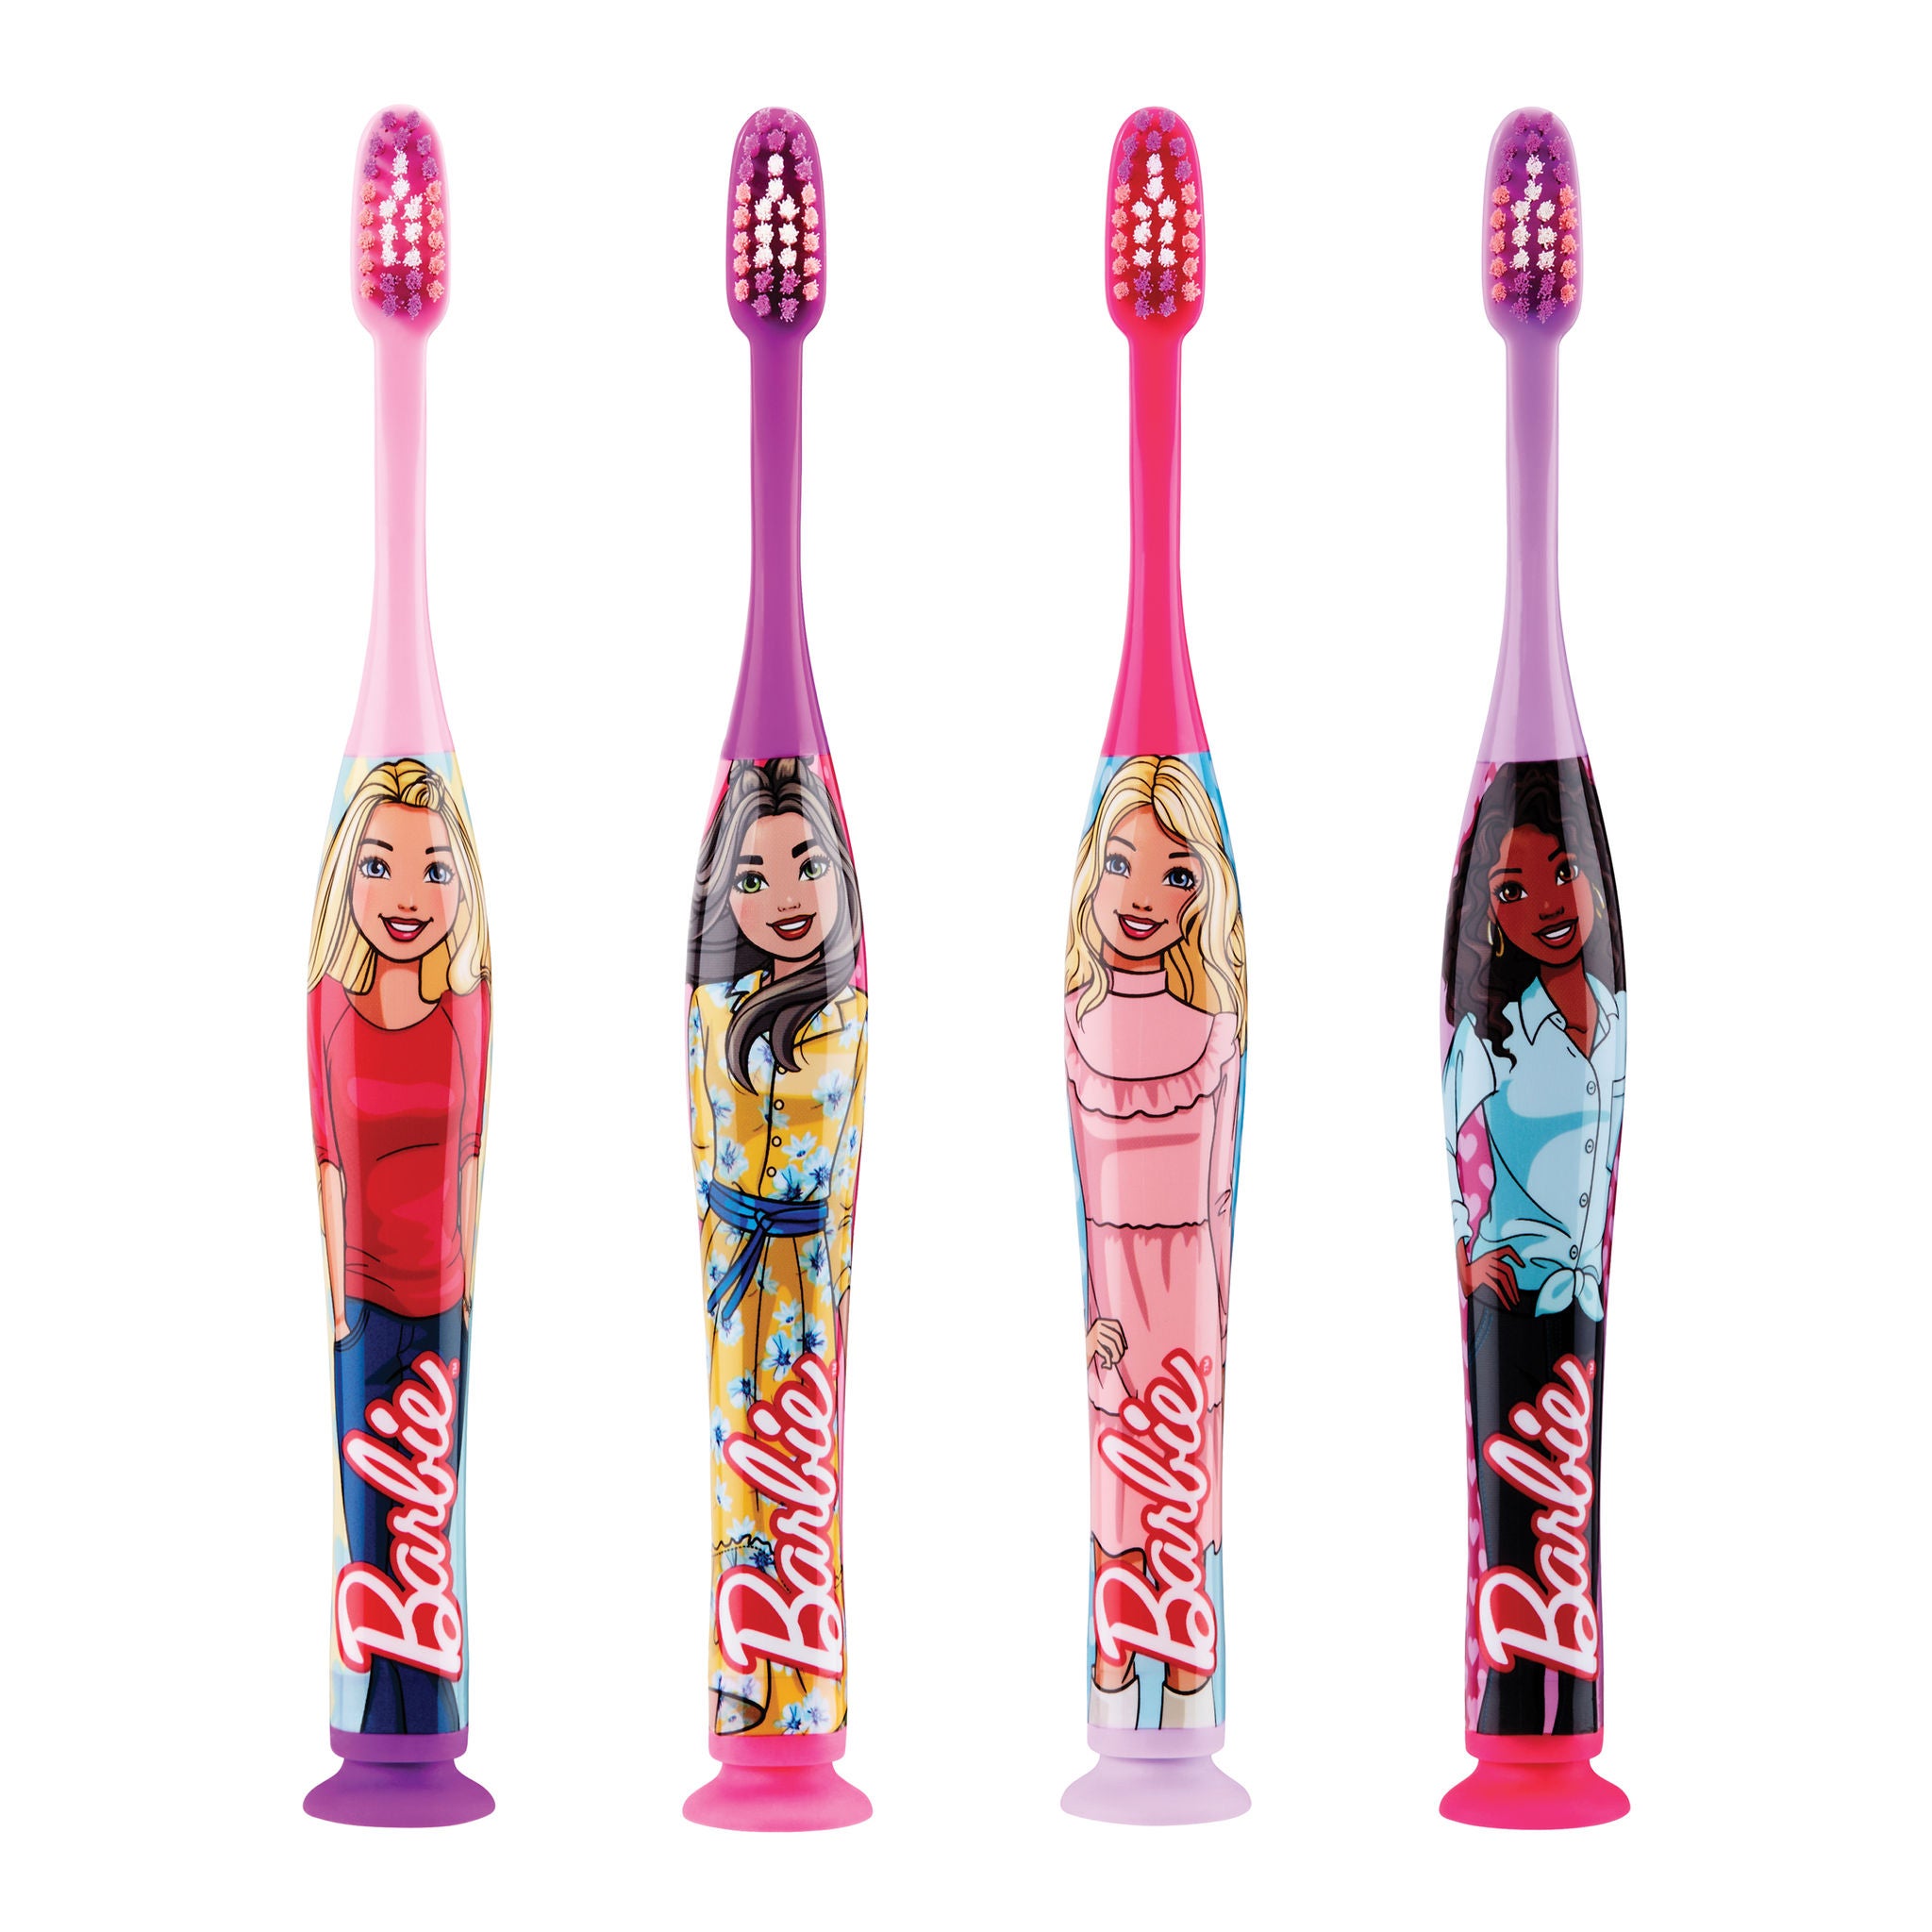 4060-Product-Toothbrush-Manual-Barbie-naked-4colors.jpg